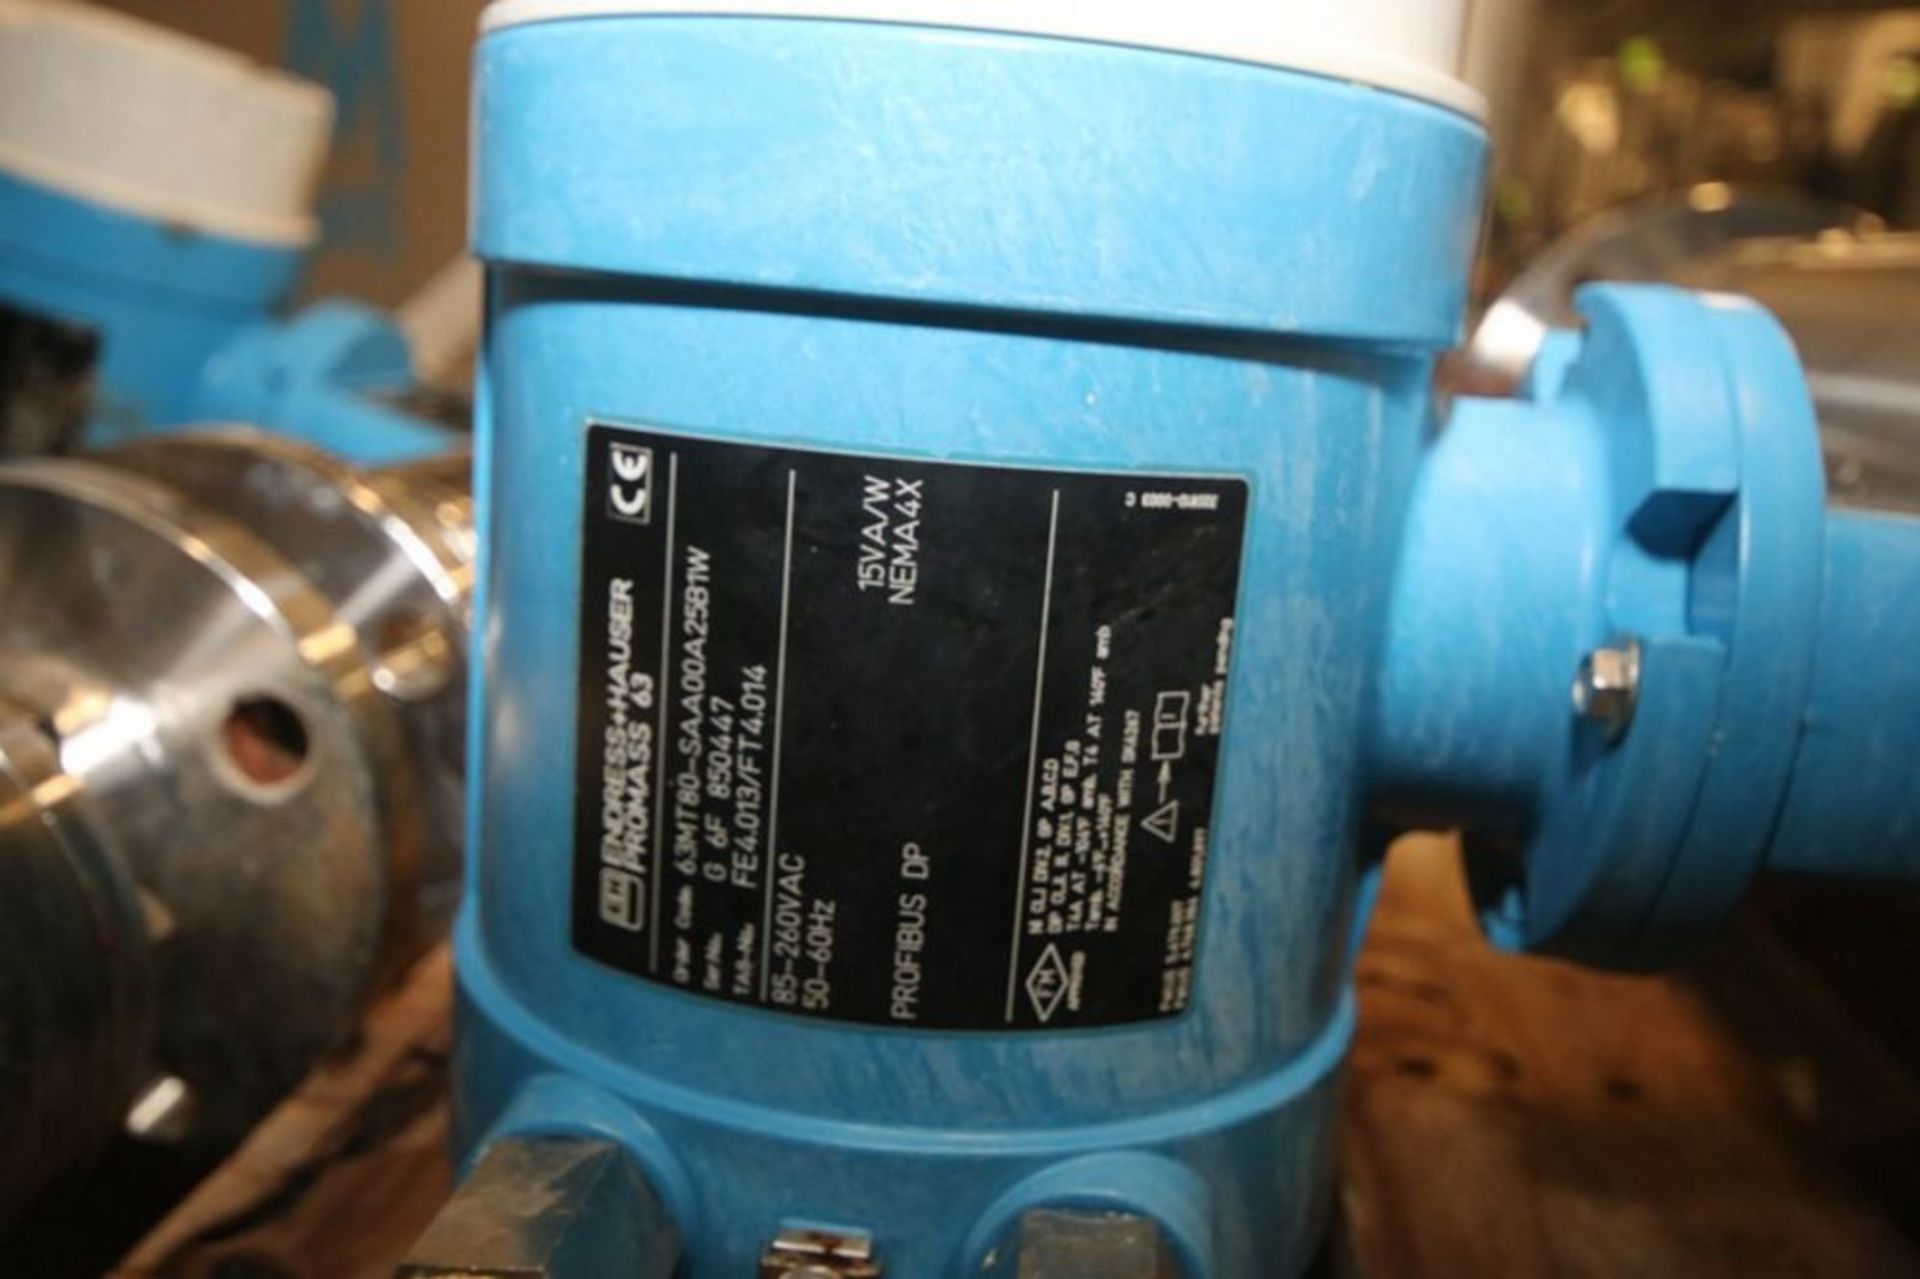 Endress+Hauser S/S Flow Meter, Order Code: 63MT80-SAA00A25B1W, S/N G 6F 850447, with 3" Bolt Type - Image 5 of 7